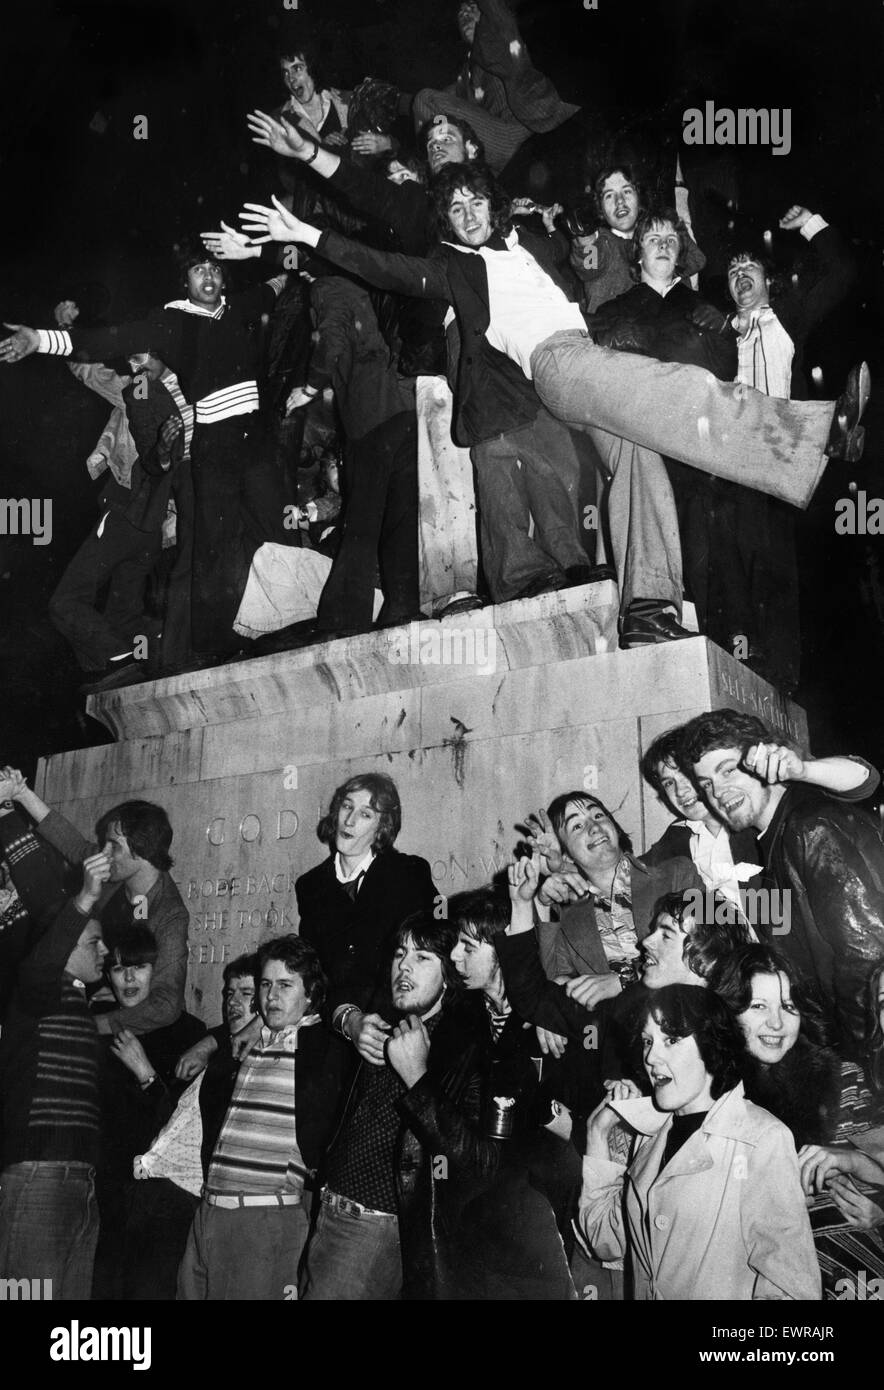 New Year revellers besiege the statue of Lady Godiva during the celebrations to see in 1977. 1st January 1977 Stock Photo